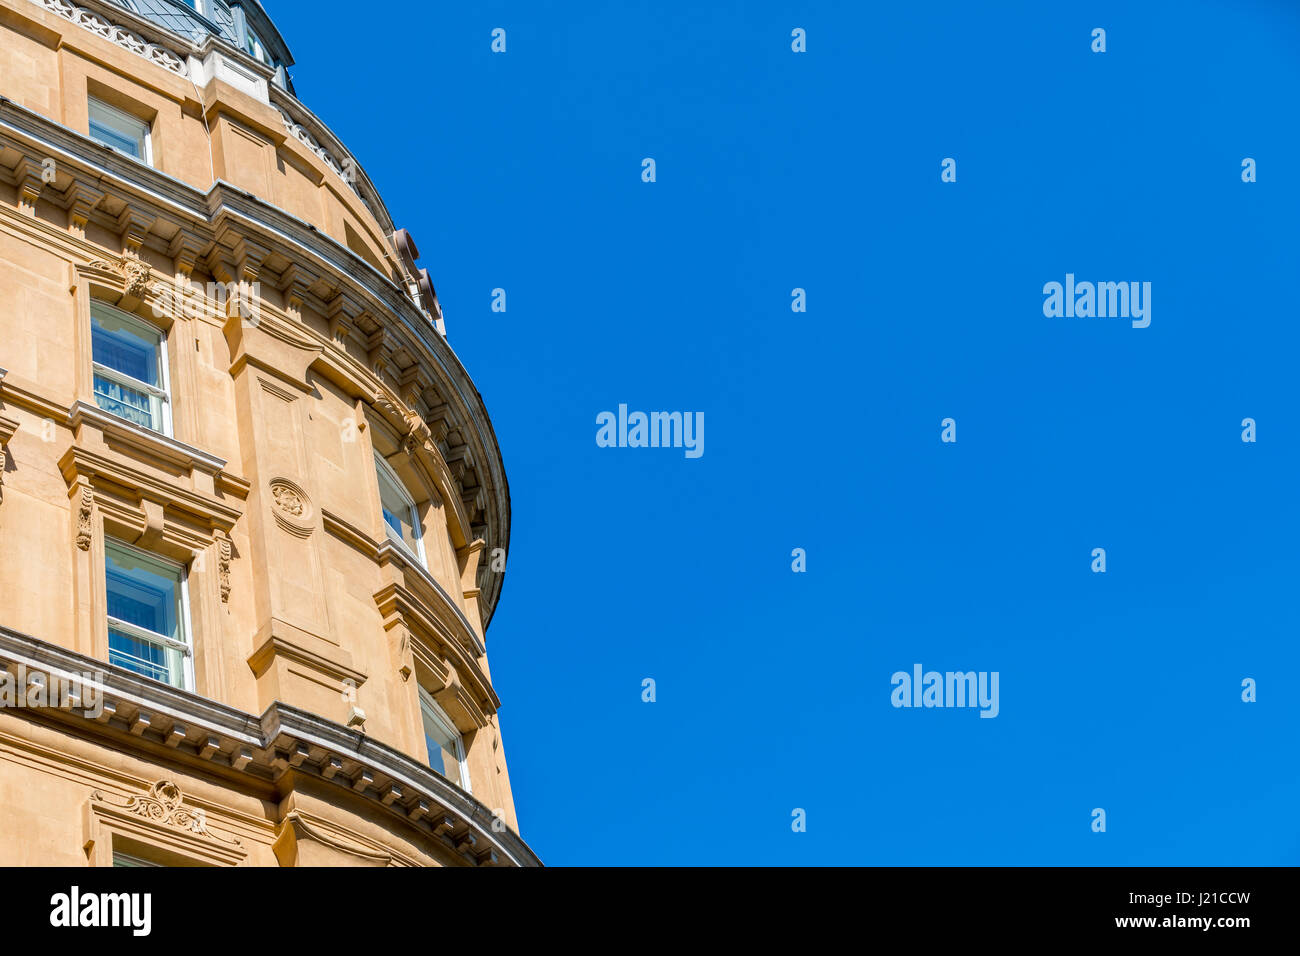 an elaborate building as seen from below against a brilliant blue sky, London, England, UK Stock Photo